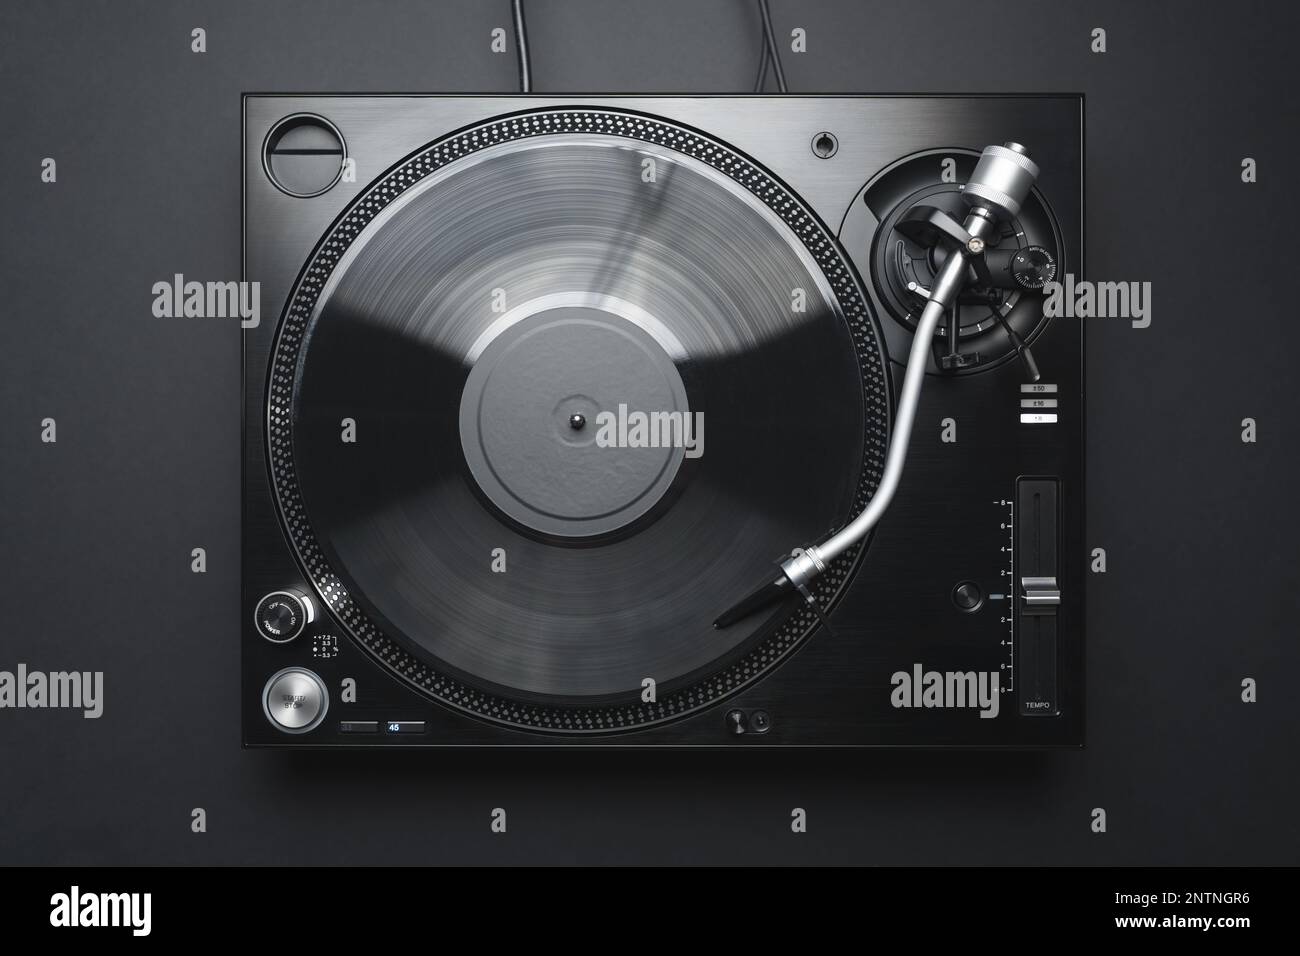 Dj turntable in flay lay. Turn table playing vinyl record with music. Stock Photo